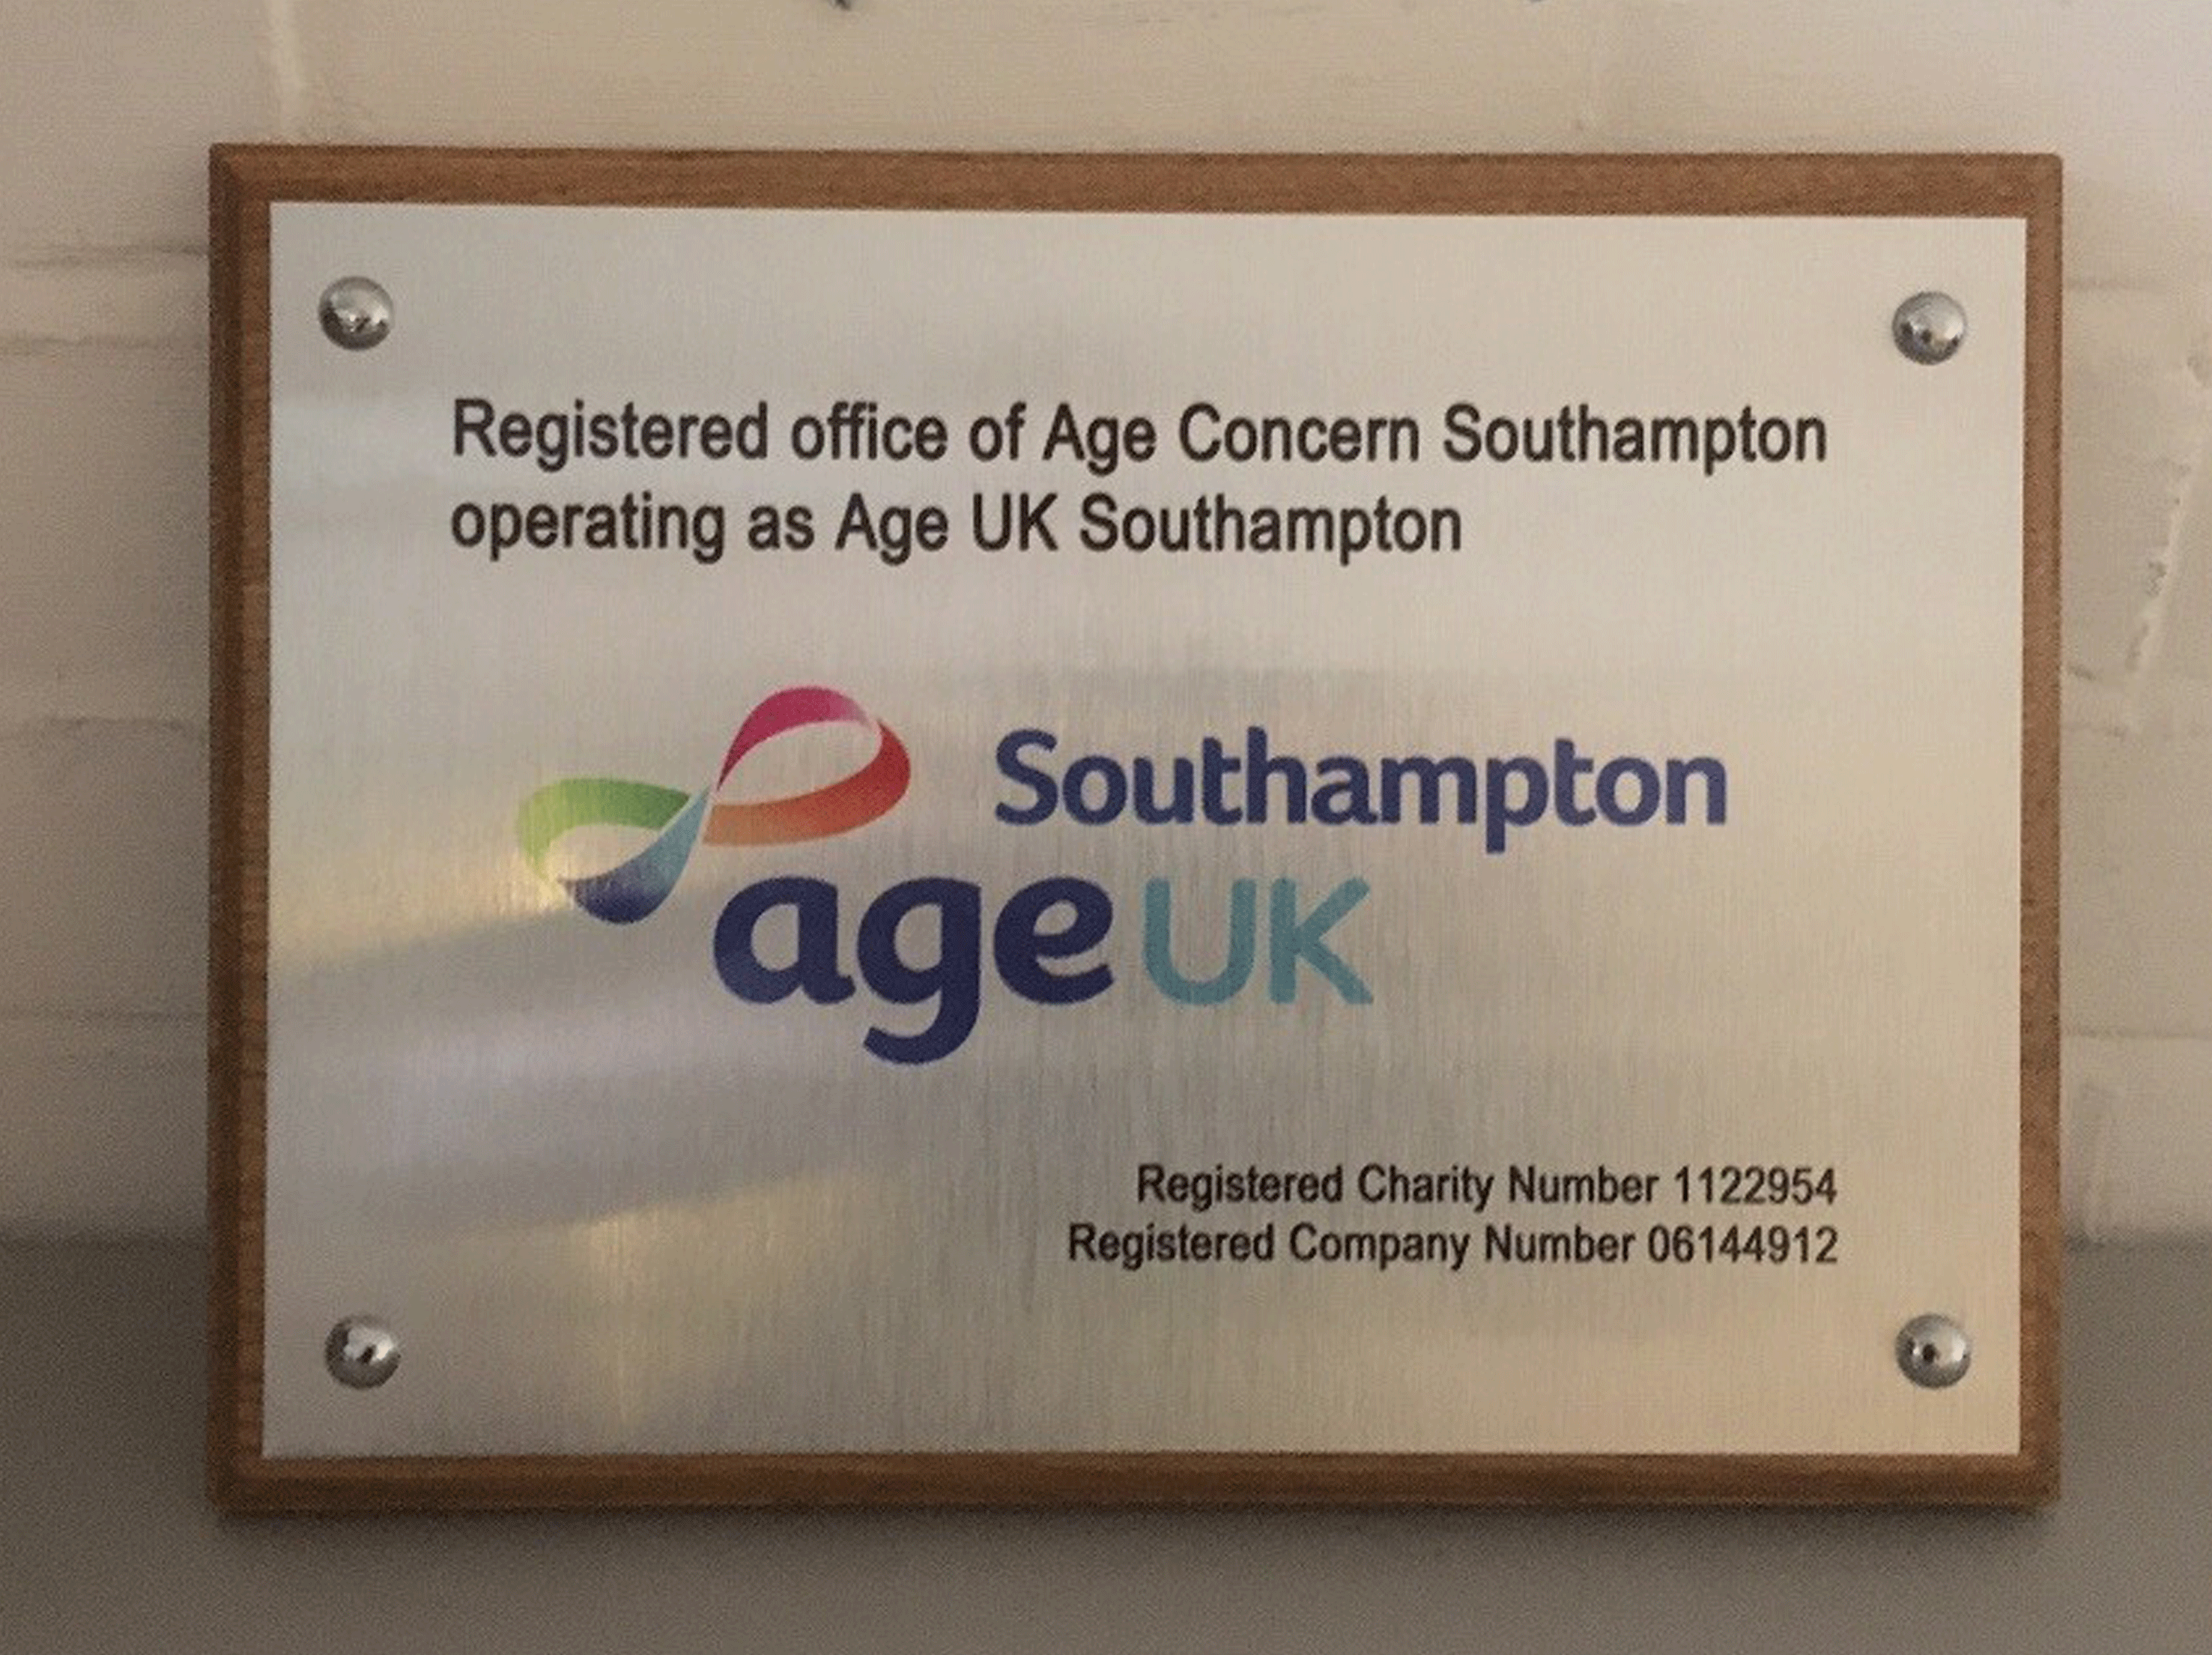 Full colour printed plaque for #ageconcern #ageuk